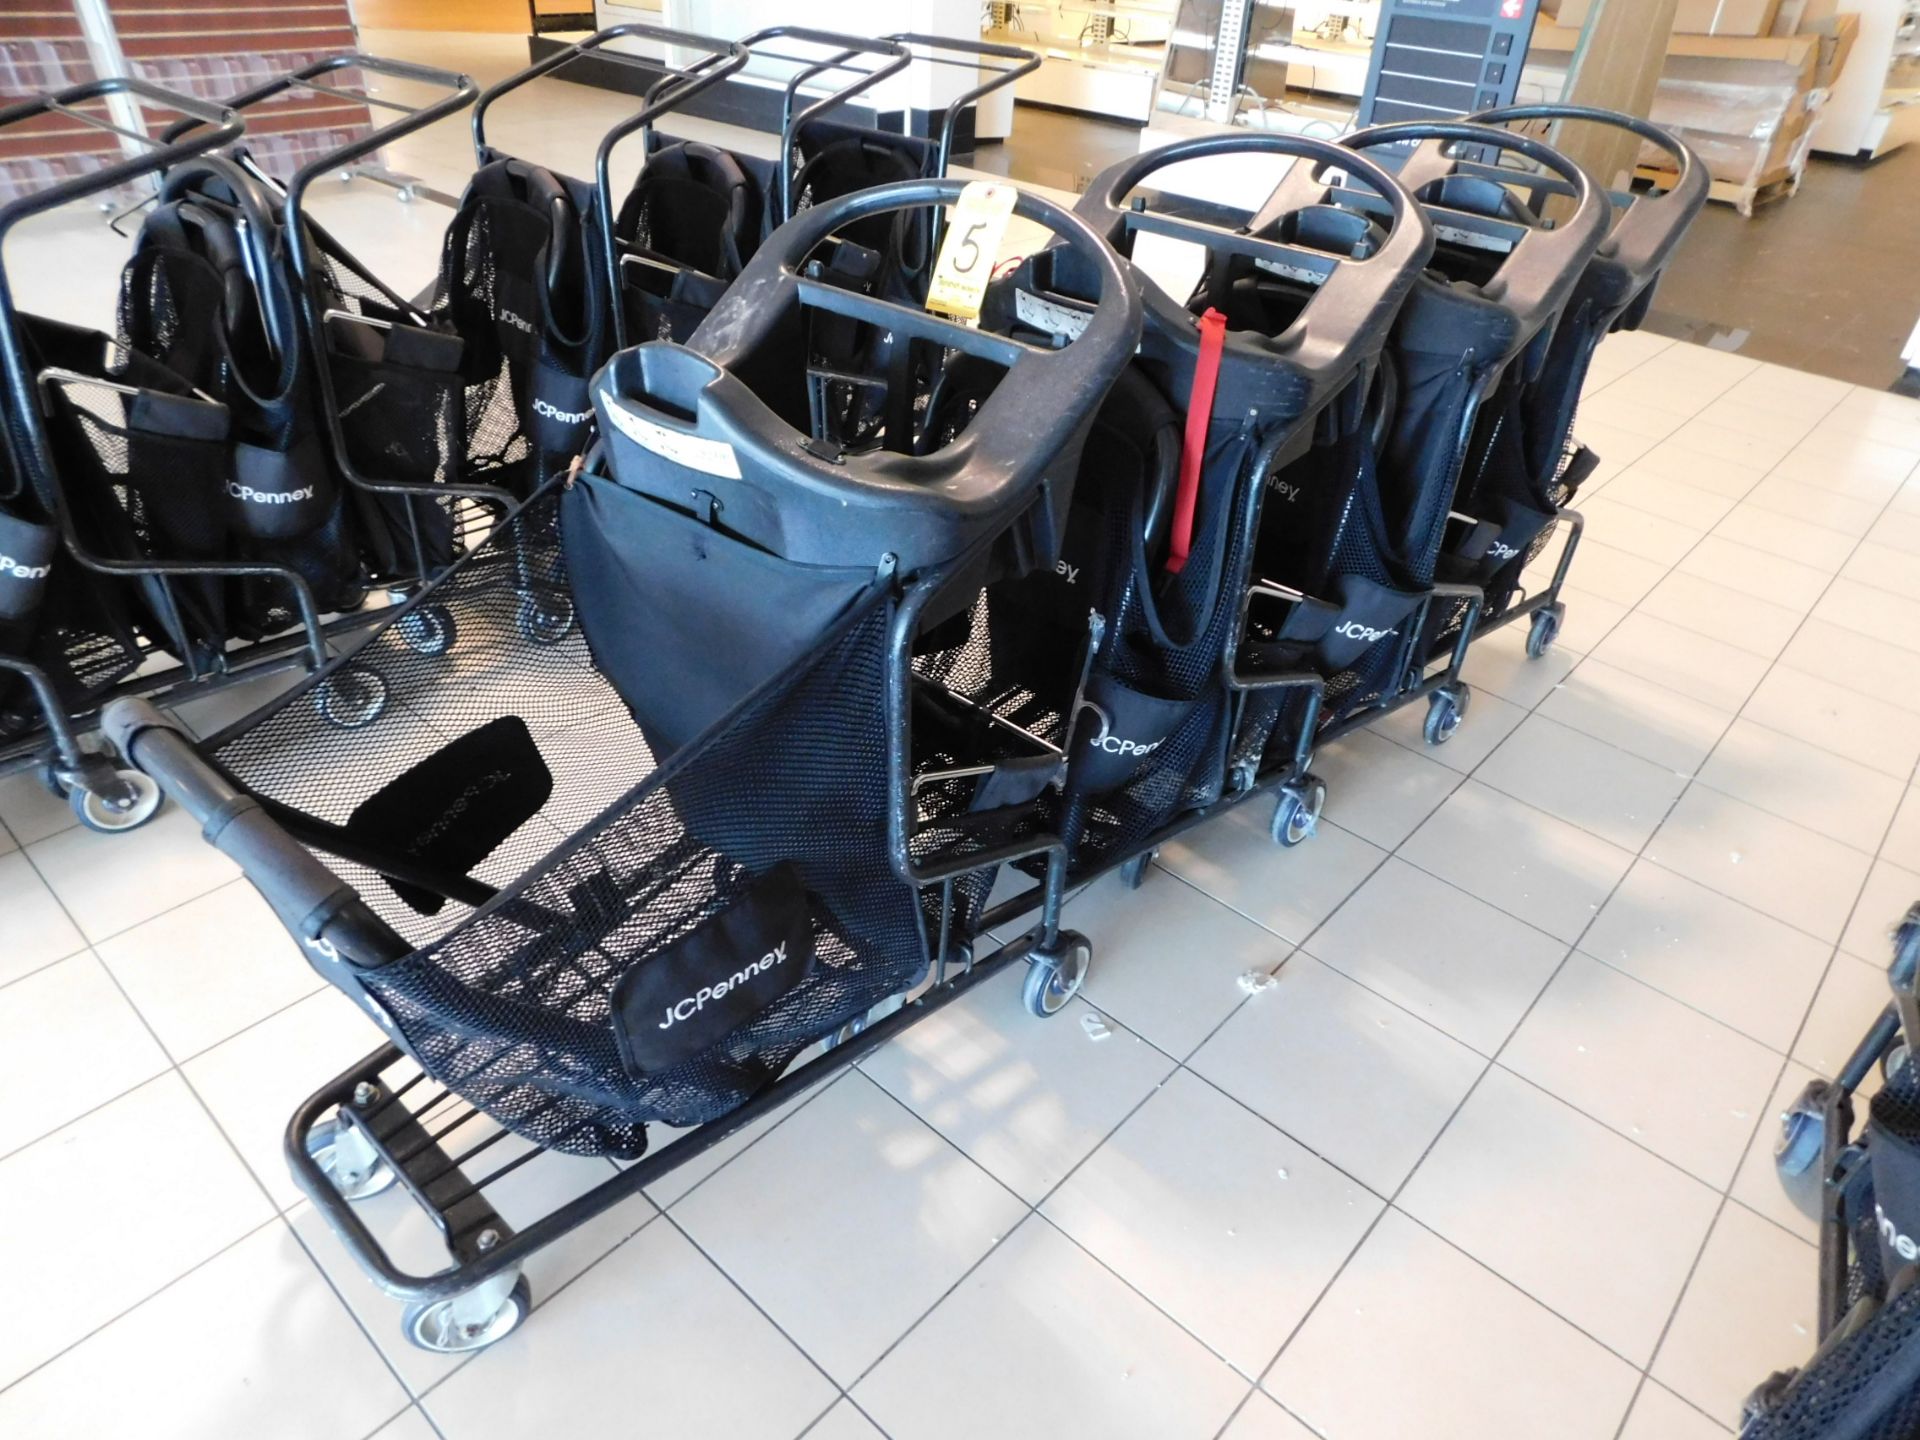 (4) Shopping Carts with Plastic Molded Infant Seat